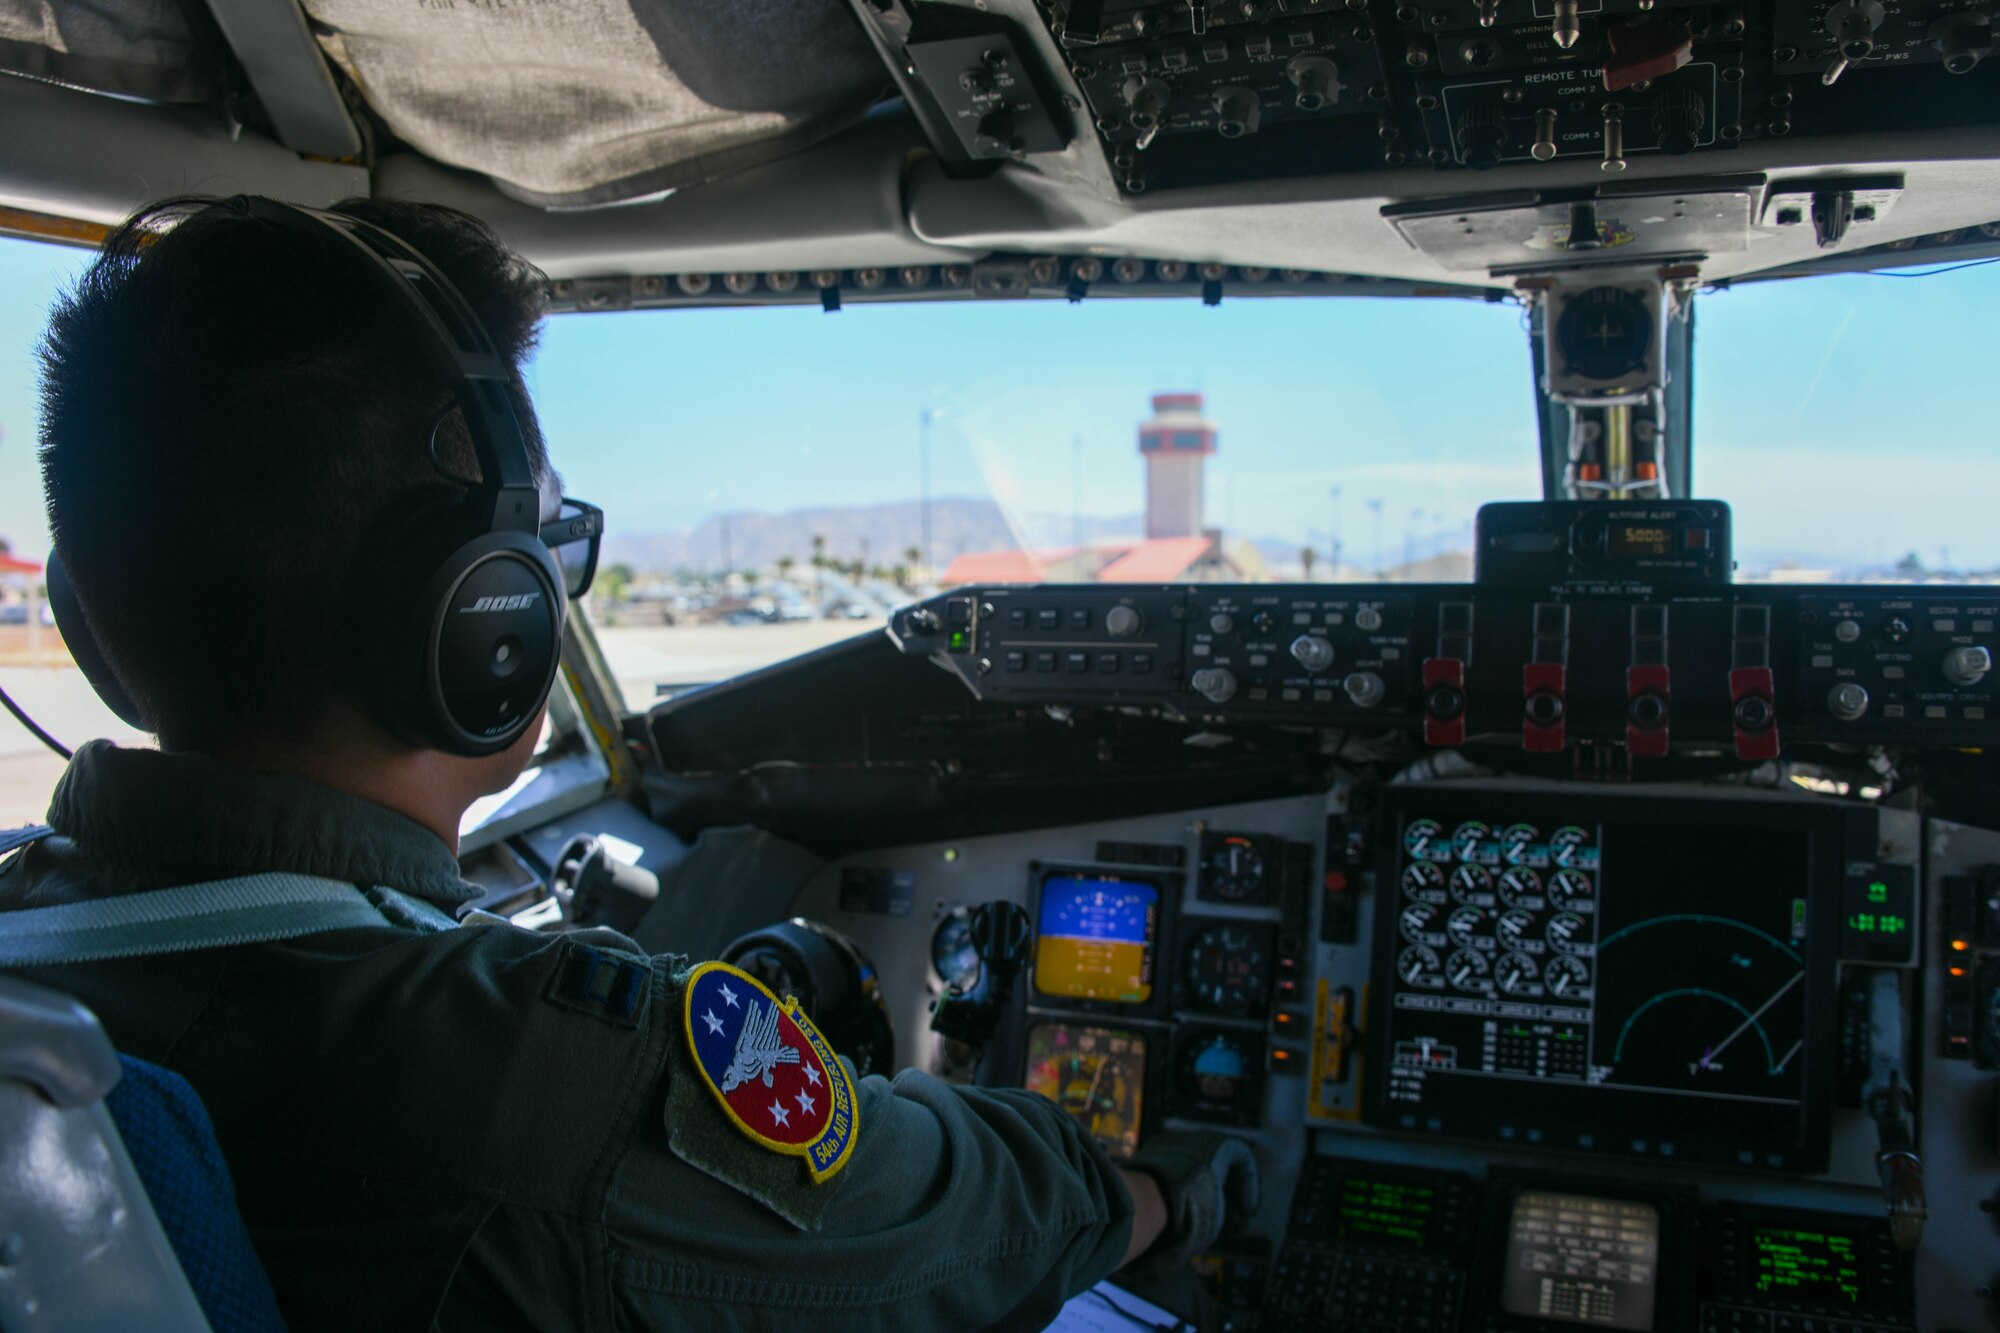 U.S. Air Force Capt. Tae Kim, an instructor pilot from the 54th Air Refueling Squadron at Altus Air Force Base, Oklahoma, performs a preflight check on a KC-135 Stratotanker at March Air Reserve Base, California, July 12, 2022. The mission provided a unique opportunity for 54th ARS instructors to train in unfamiliar airspace while staging out of another location. (U.S. Air Force photo by Airman 1st Class Trenton Jancze)